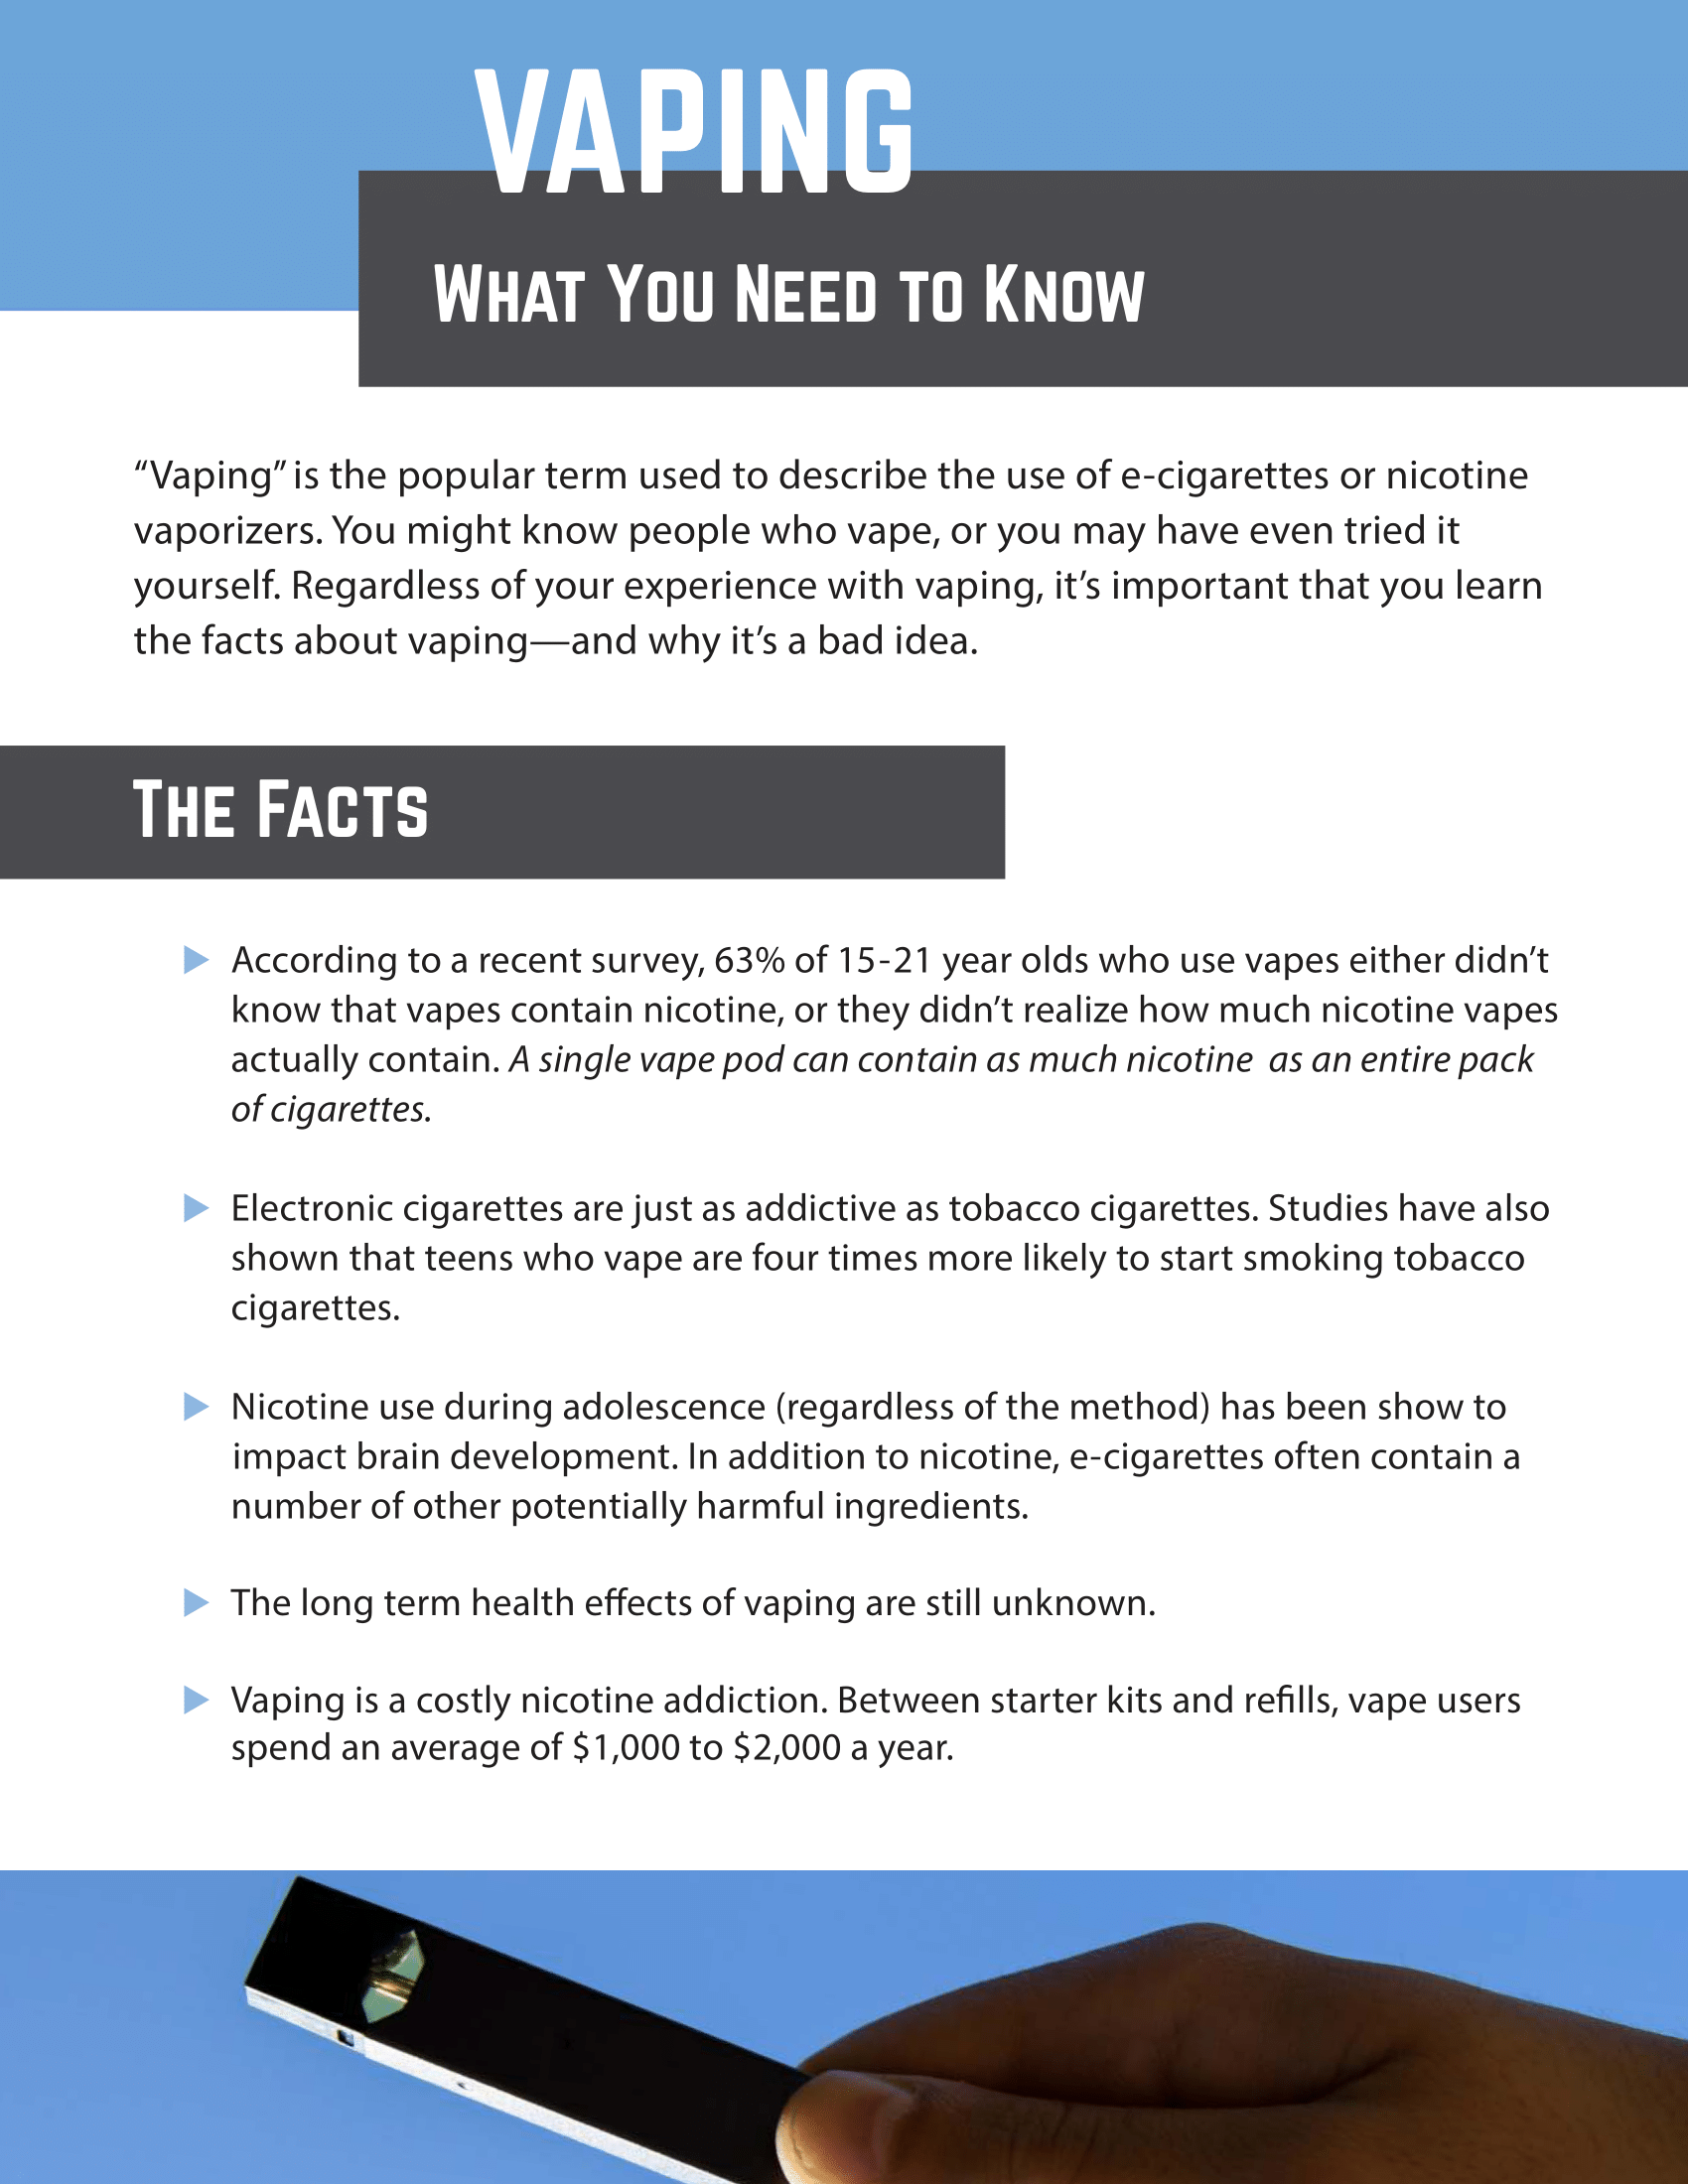 Vaping - What You Need to Know